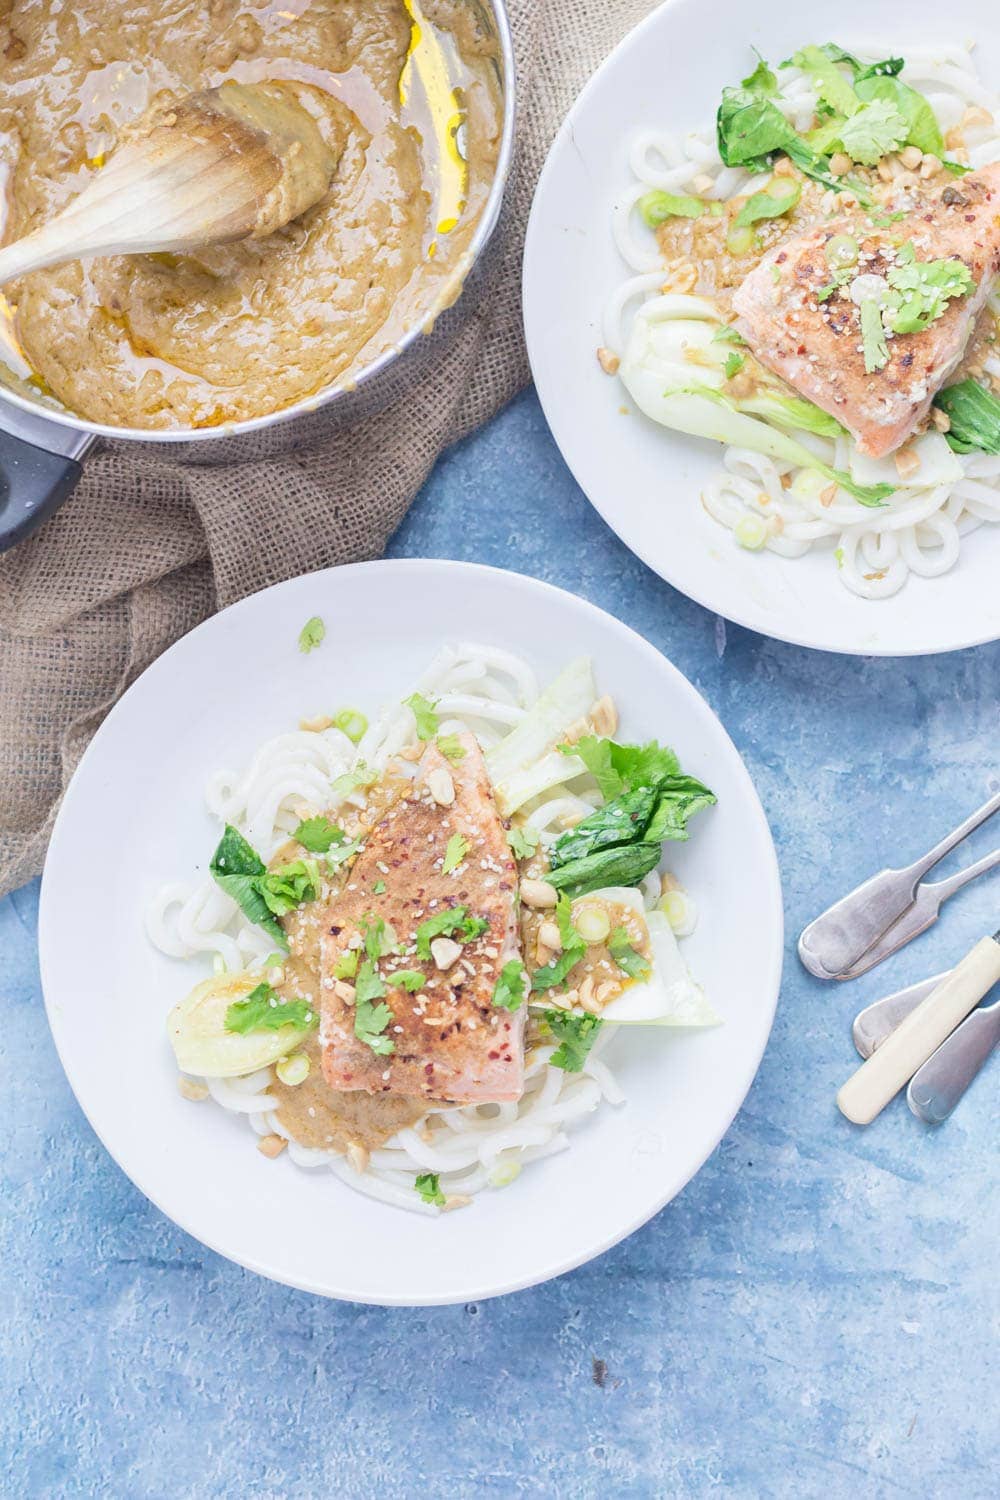 Peanut Salmon Udon Noodles with Pak Choi. The sauce on this peanut salmon is to die for! Perfectly flaky salmon sits on top of udon noodles and wilted pak choi with a creamy peanut sauce. #salmon #udonnoodles #recipe #dinner